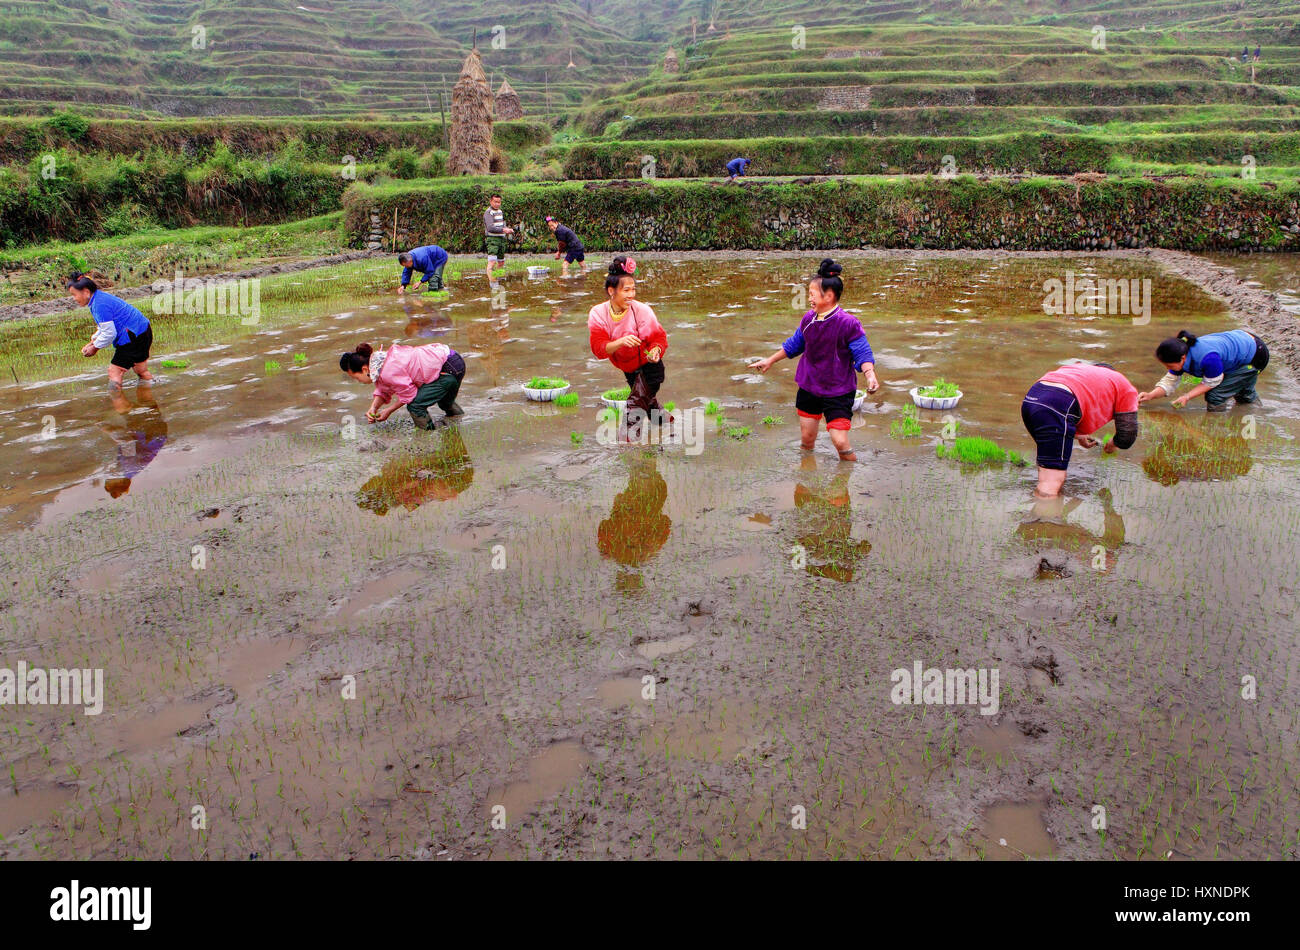 GUIZHOU, CHINA - APRIL 18: Spring field work in southwestern China, April 18, 2010. Chinese farmers are planting rice seedlings into soil. Women stand Stock Photo